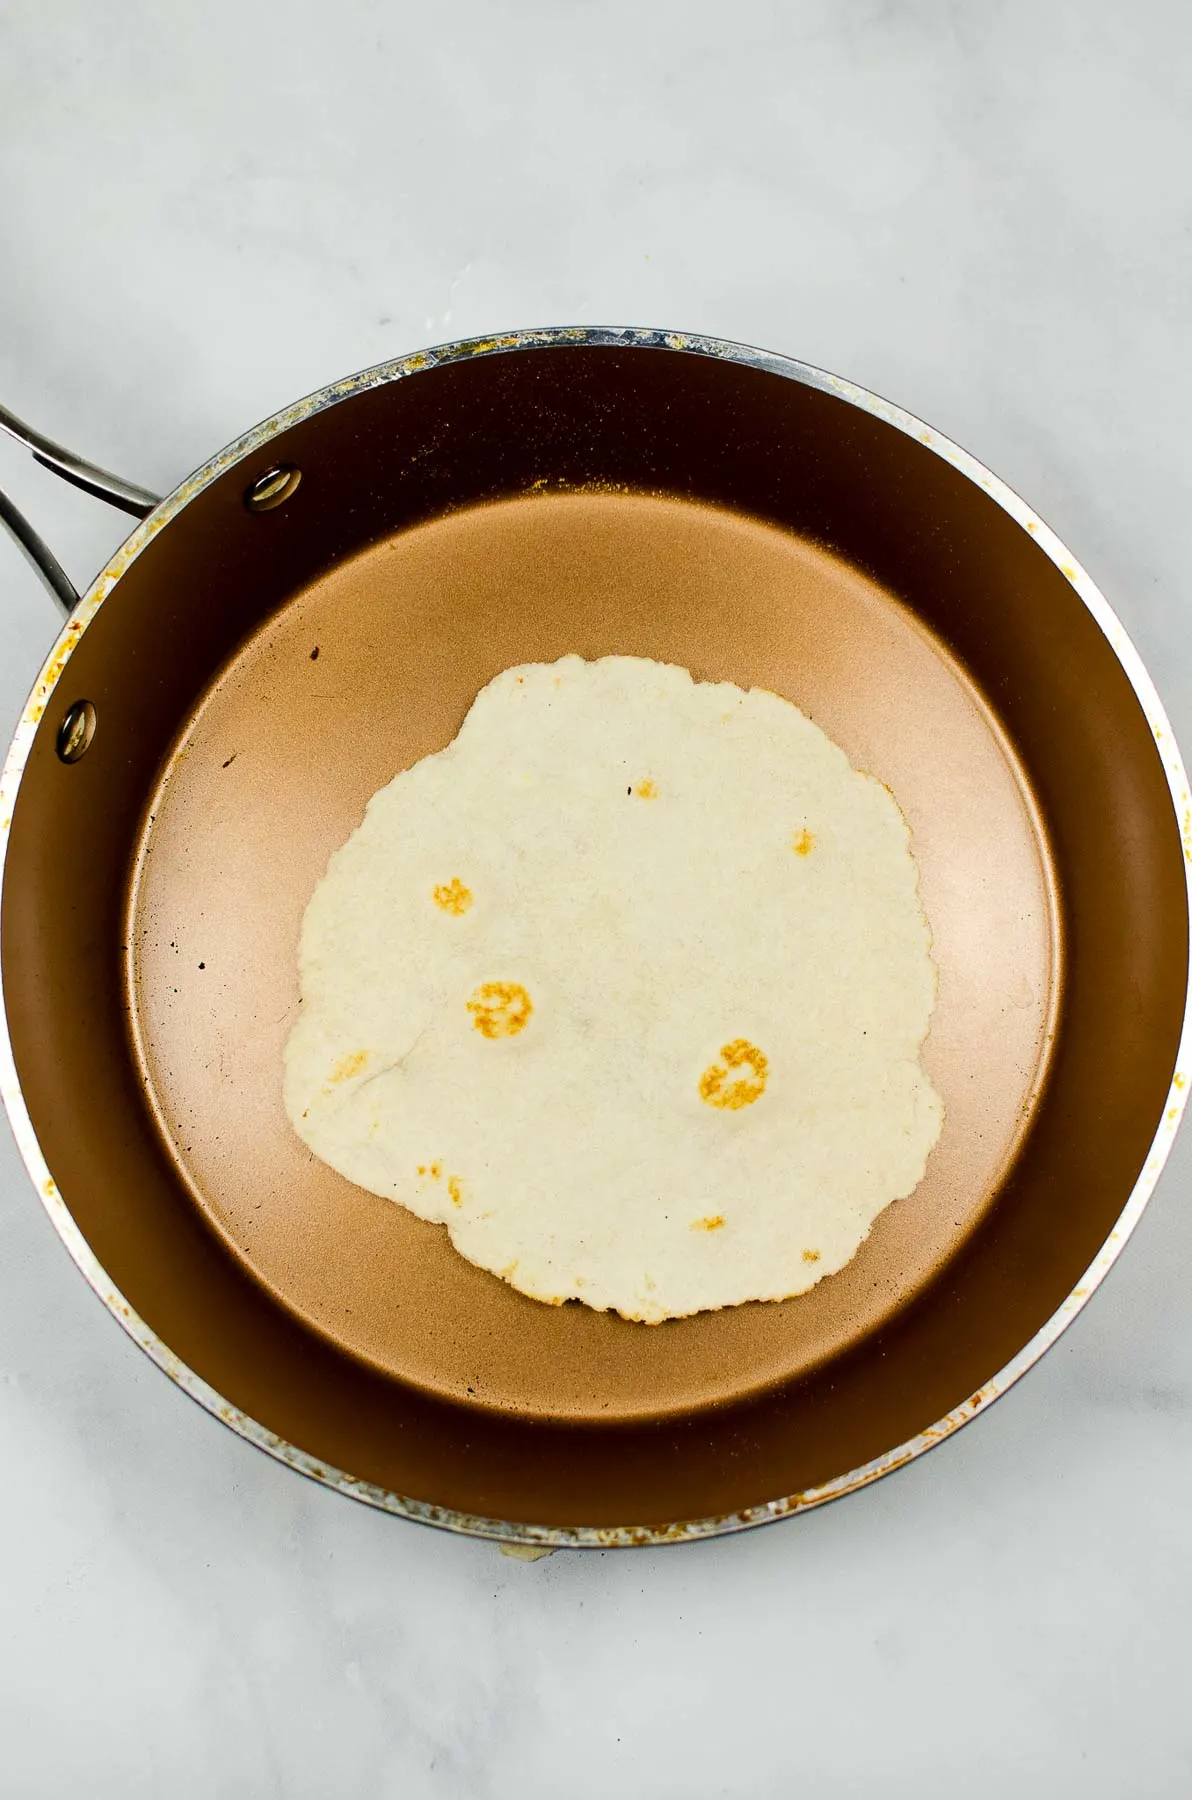 Cooking a homemade tortilla in a skillet.